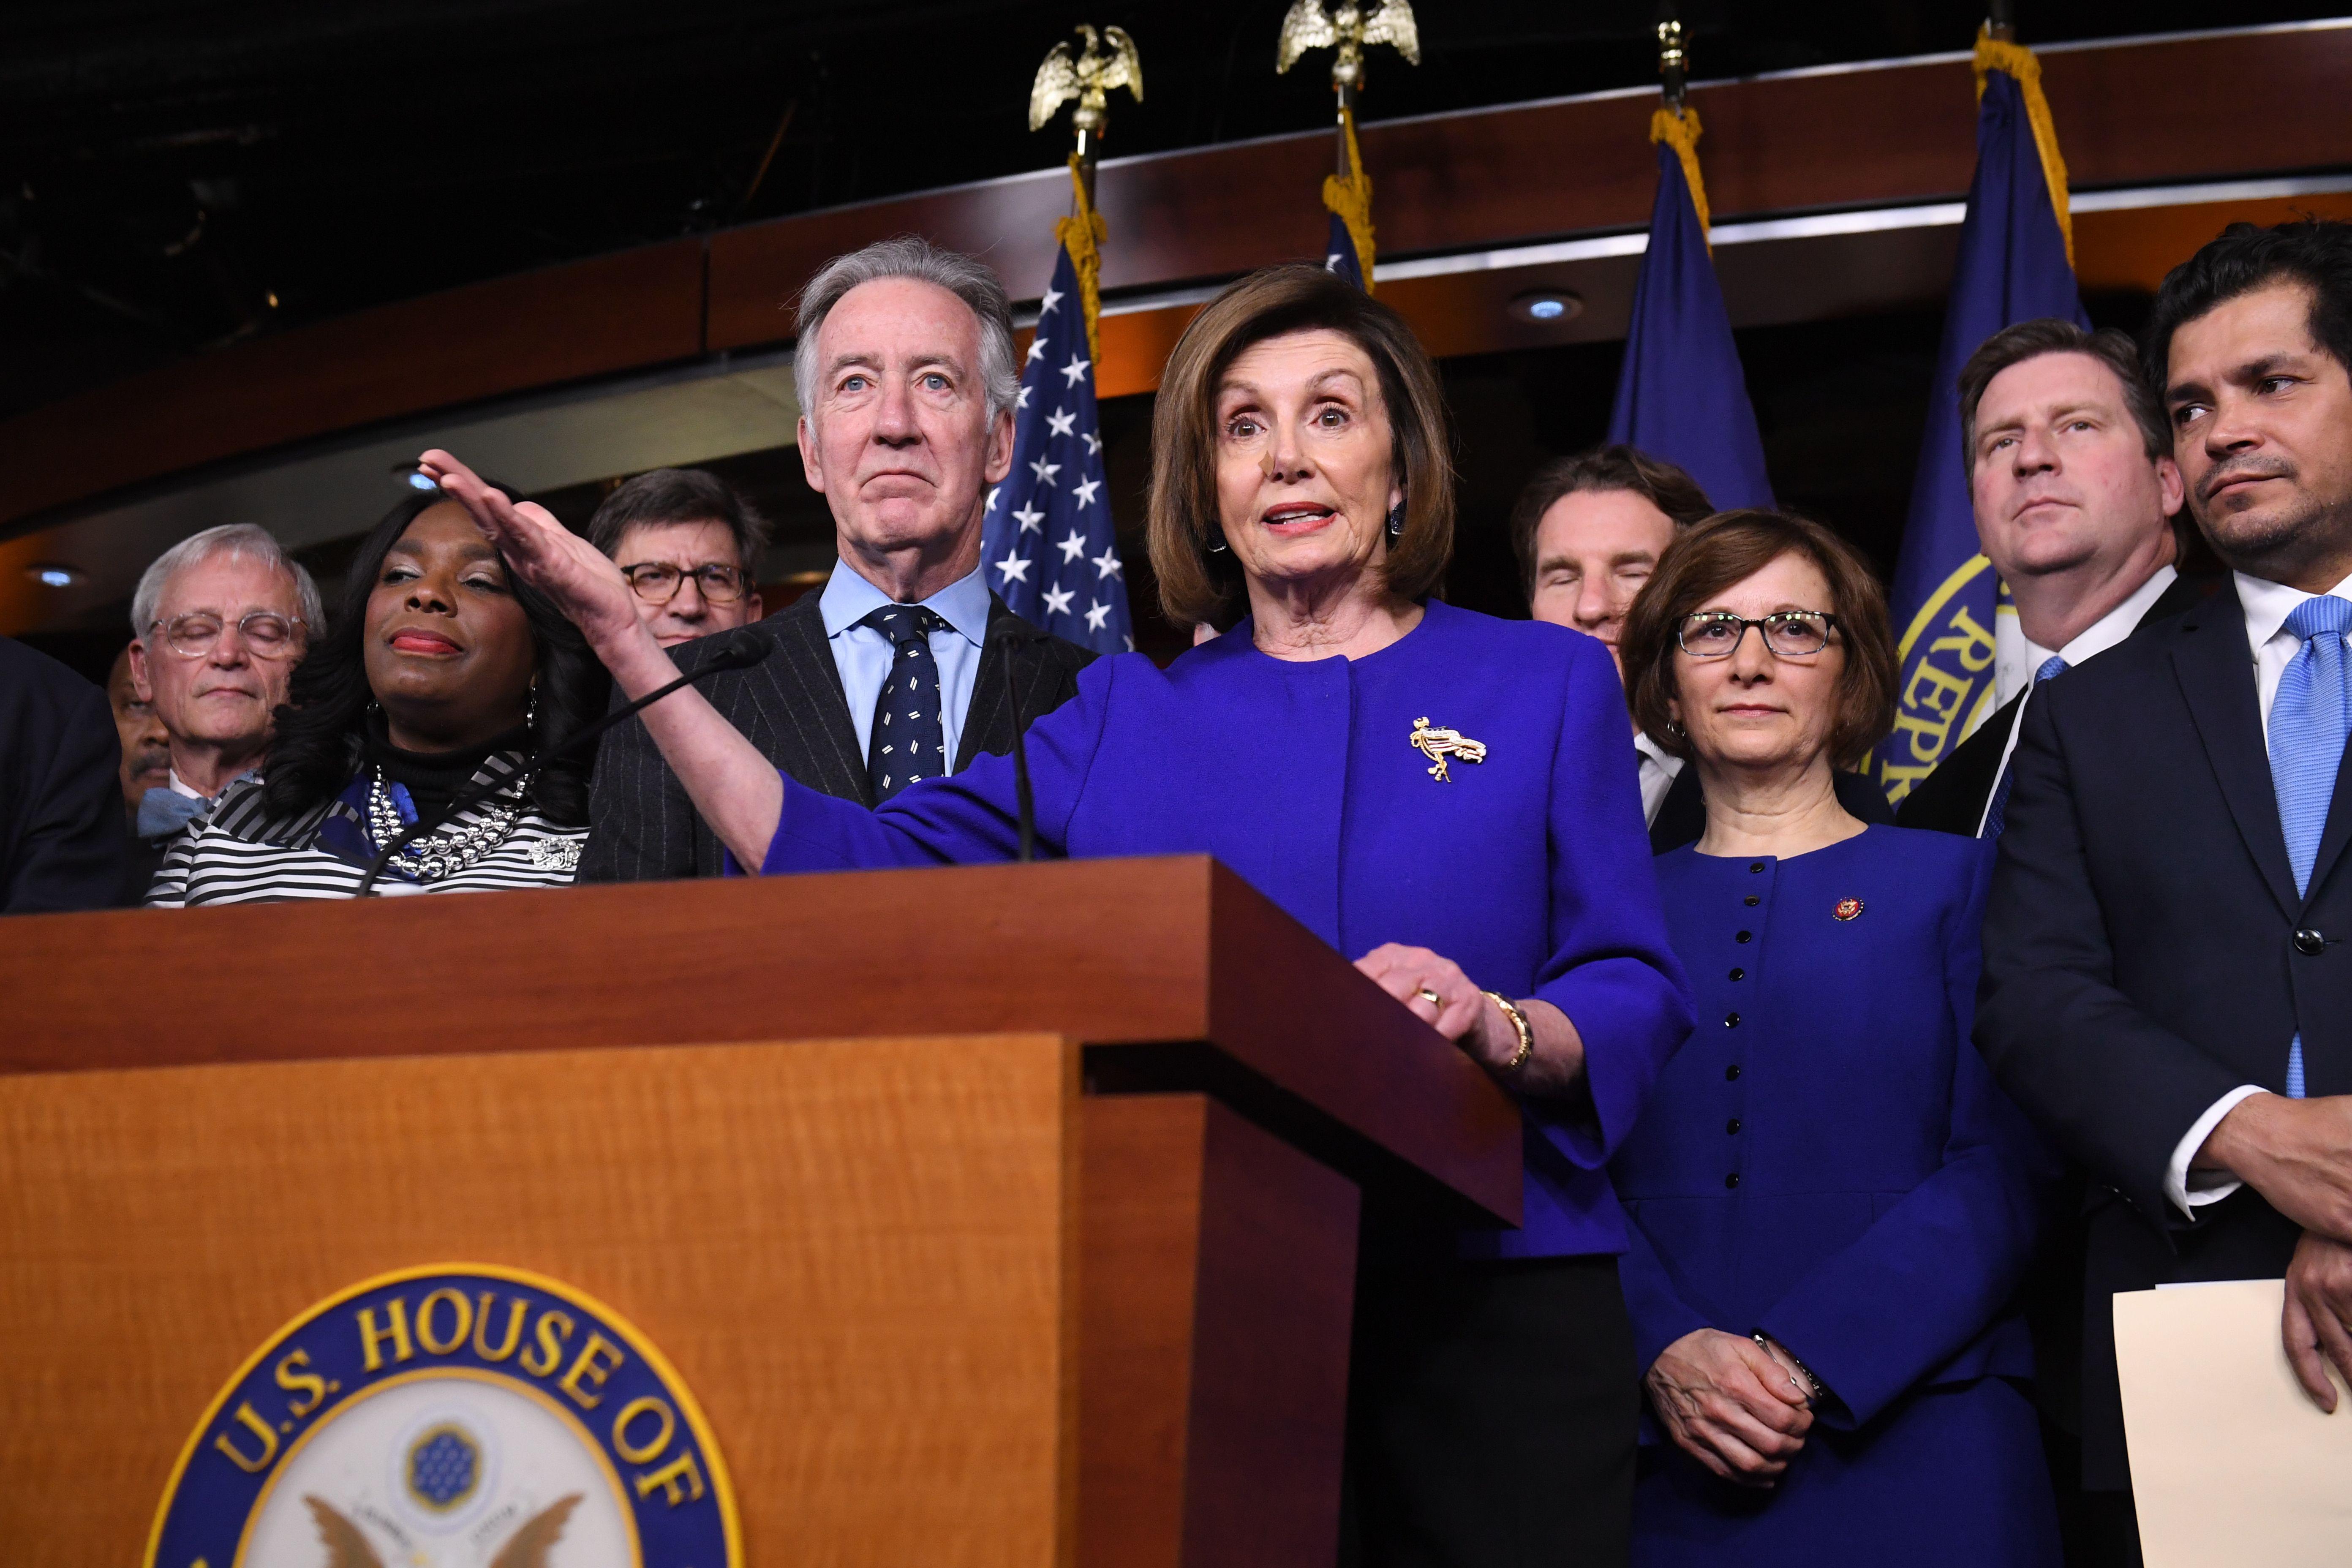 Nancy Pelosi, surrounded by other congressional leaders, speaks at a lectern.